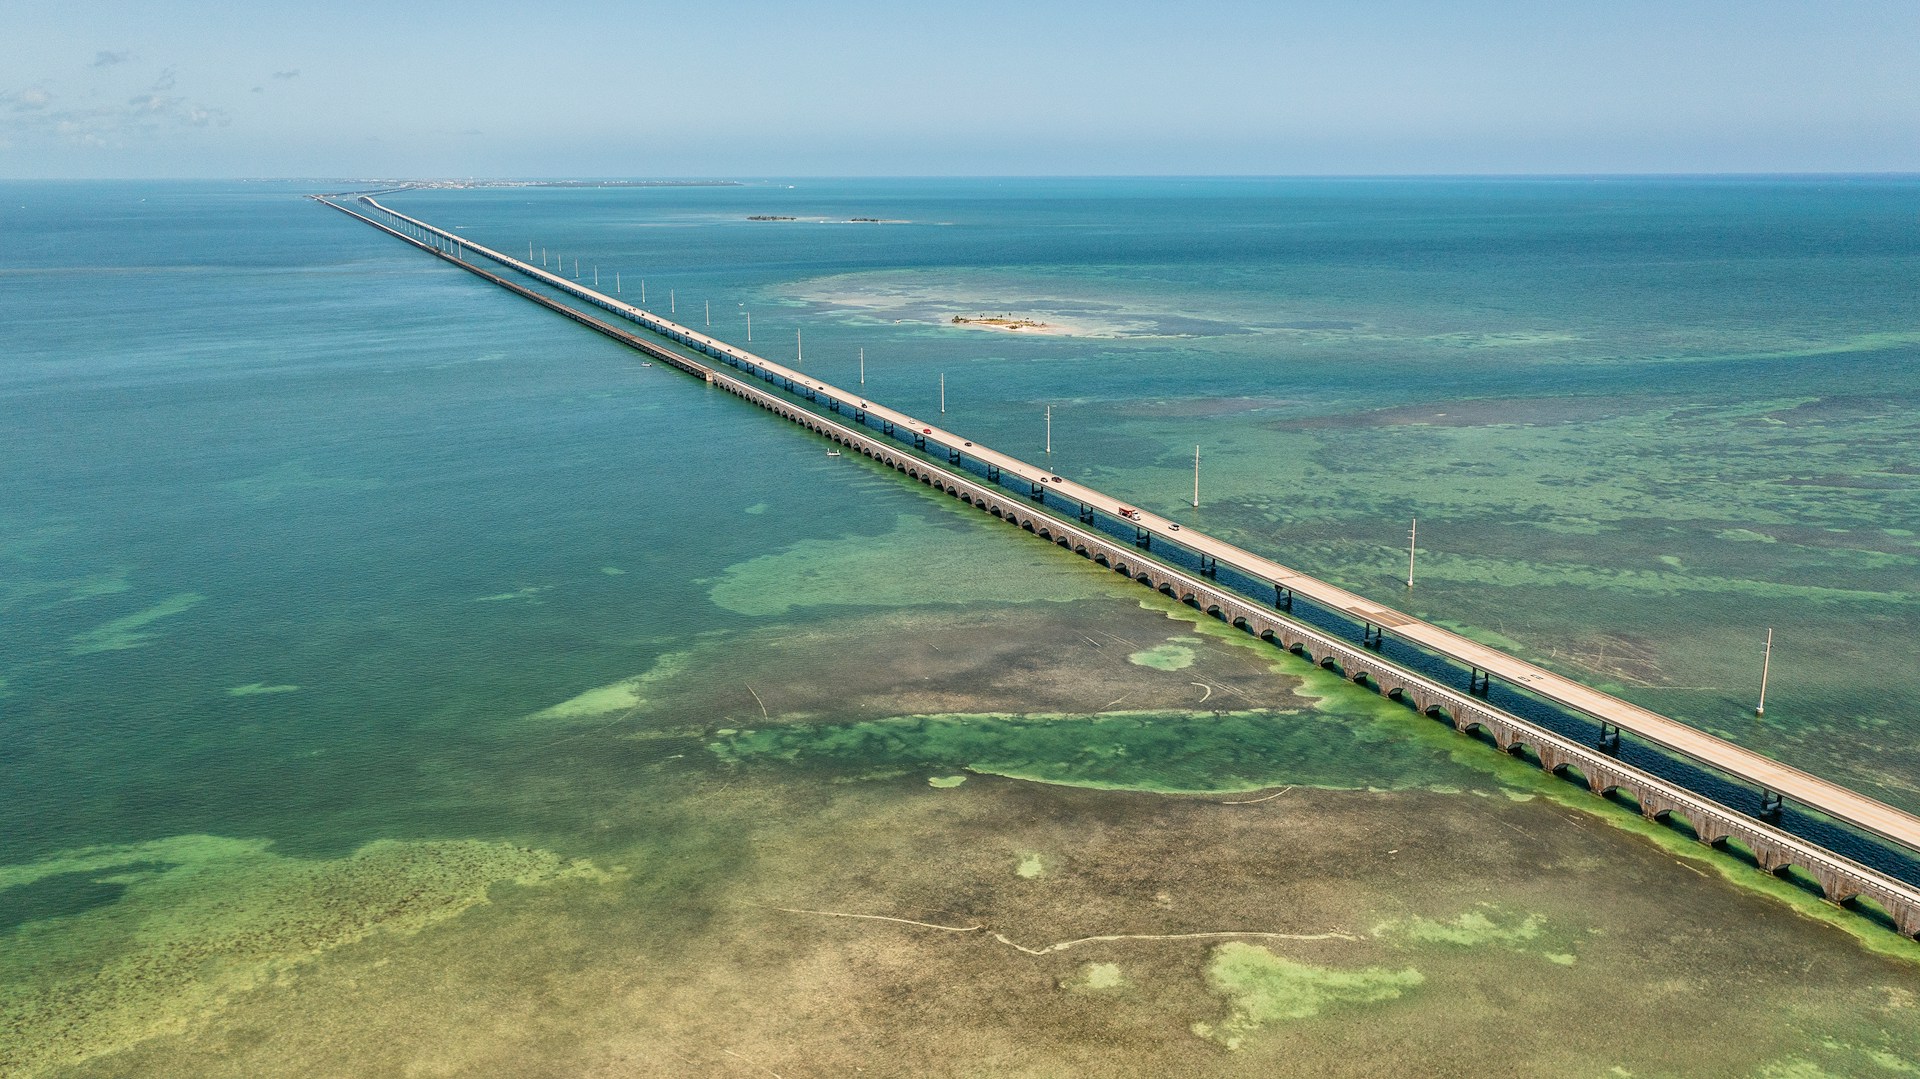 <p><strong><em>113 miles, 1 day</em></strong></p>  <p>U.S. 1 in the Florida Keys is a splendidly scenic drive, also called the Overseas Highway. The road is lined with beaches and small man-made bridges, each taking you through what looks like paradise.</p>  <p>To initiate your journey, start with Key Largo, called the "Diving Capital of the World '' and known for its vivid coral reefs for exploration. Take a road trip through the <a href="https://en.wikipedia.org/wiki/Seven_Mile_Bridge" rel="noreferrer noopener">Seven Mile Bridge</a>, the Pinnacle of Engineering, and enjoy tasty seafood in Marathon.</p>  <p>Go touring in Bahia Honda State Park, and then go towards Key West, where you can walk through Duval Street and visit the famous house of Ernest Hemingway. </p>  <p class="feed-msn-follow"><strong><a href="https://www.msn.com/en-us/channel/source/FamilyProof/sr-vid-j8xufcjxru9fdvjb0sa9xwsdtip7e52uxingspnca77dvqsbvnka" rel="noreferrer noopener">Follow us on MSN to see more exclusive content.</a></strong></p>